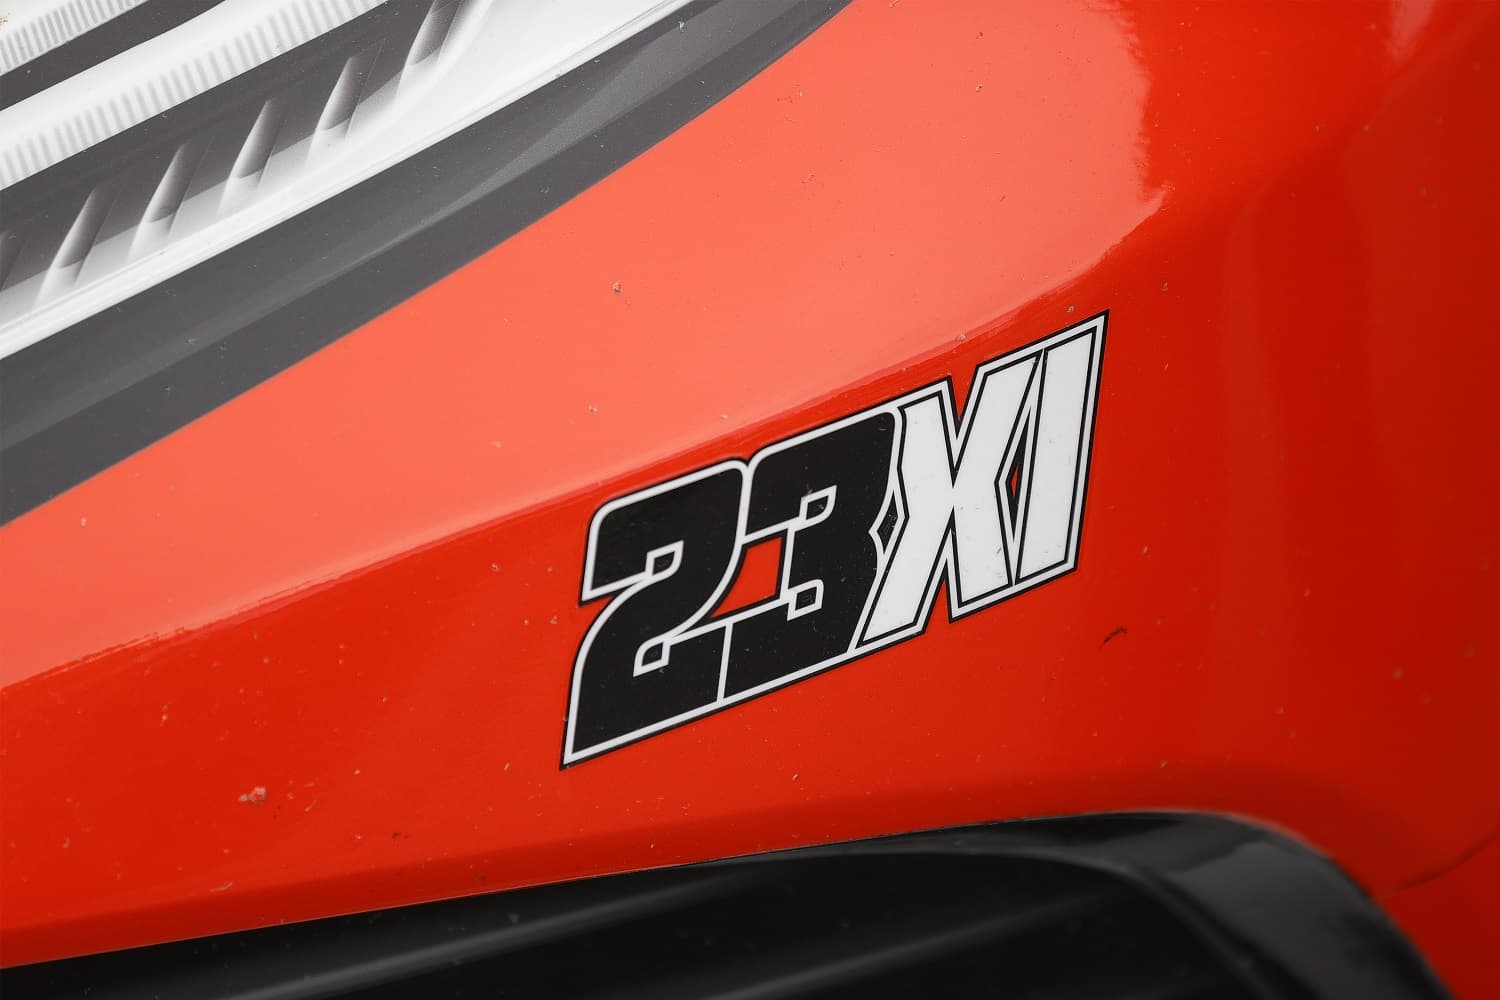 A detail of the 23XI Racing logo on the #23 DoorDash Toyota, driven by Bubba Wallace on the grid prior to the NASCAR Cup Series Daytona 500 on Feb. 14, 2021. | Jared C. Tilton/Getty Images